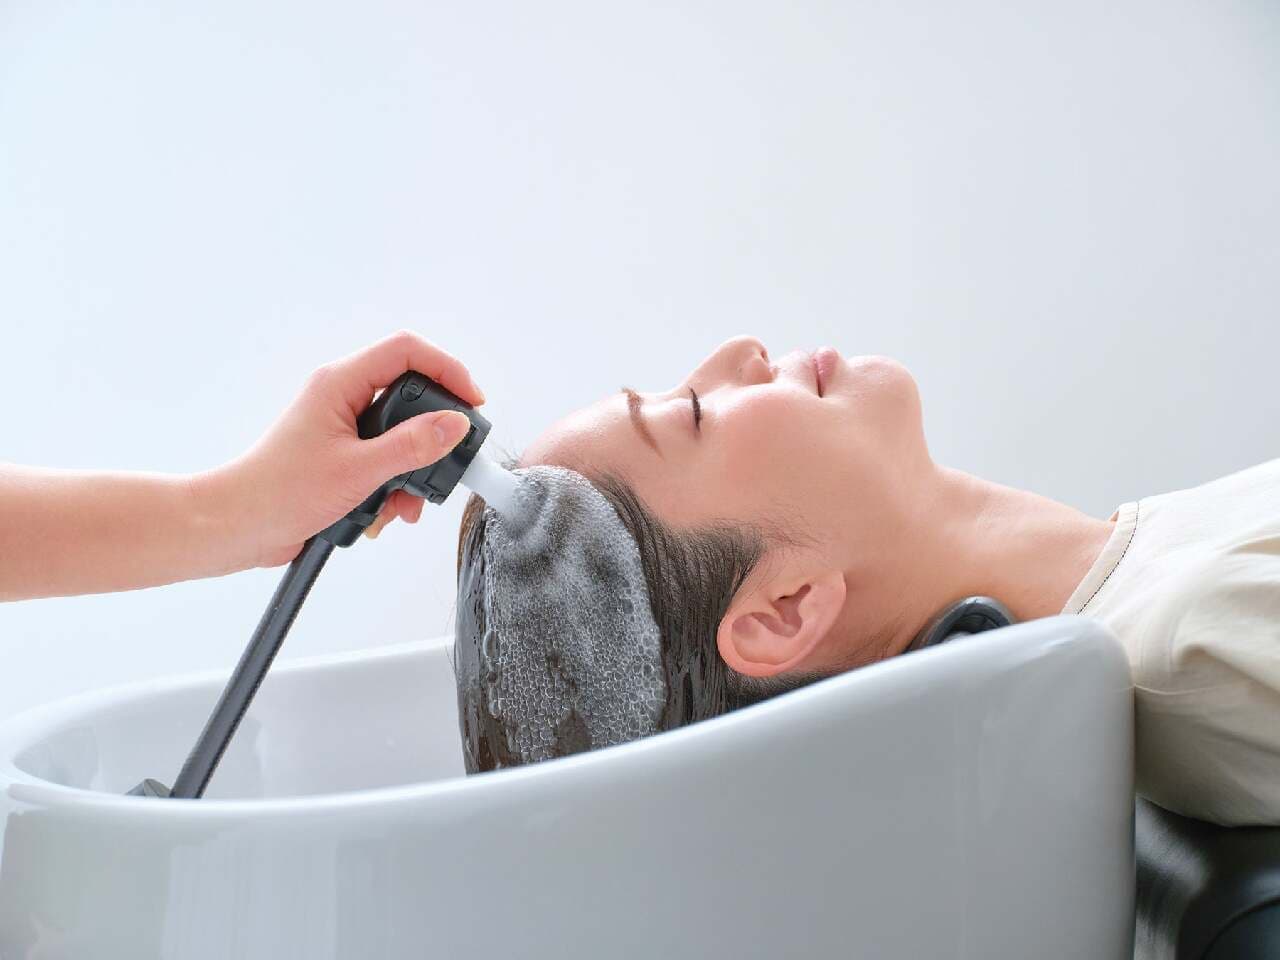 Takara Belmont's Shampoo Service Revolution "JETCUBE" with New "Active Bubble Fountain" Technology to be Launched on April 10 - New Customer Experience and Enhanced Salon Value Image 1